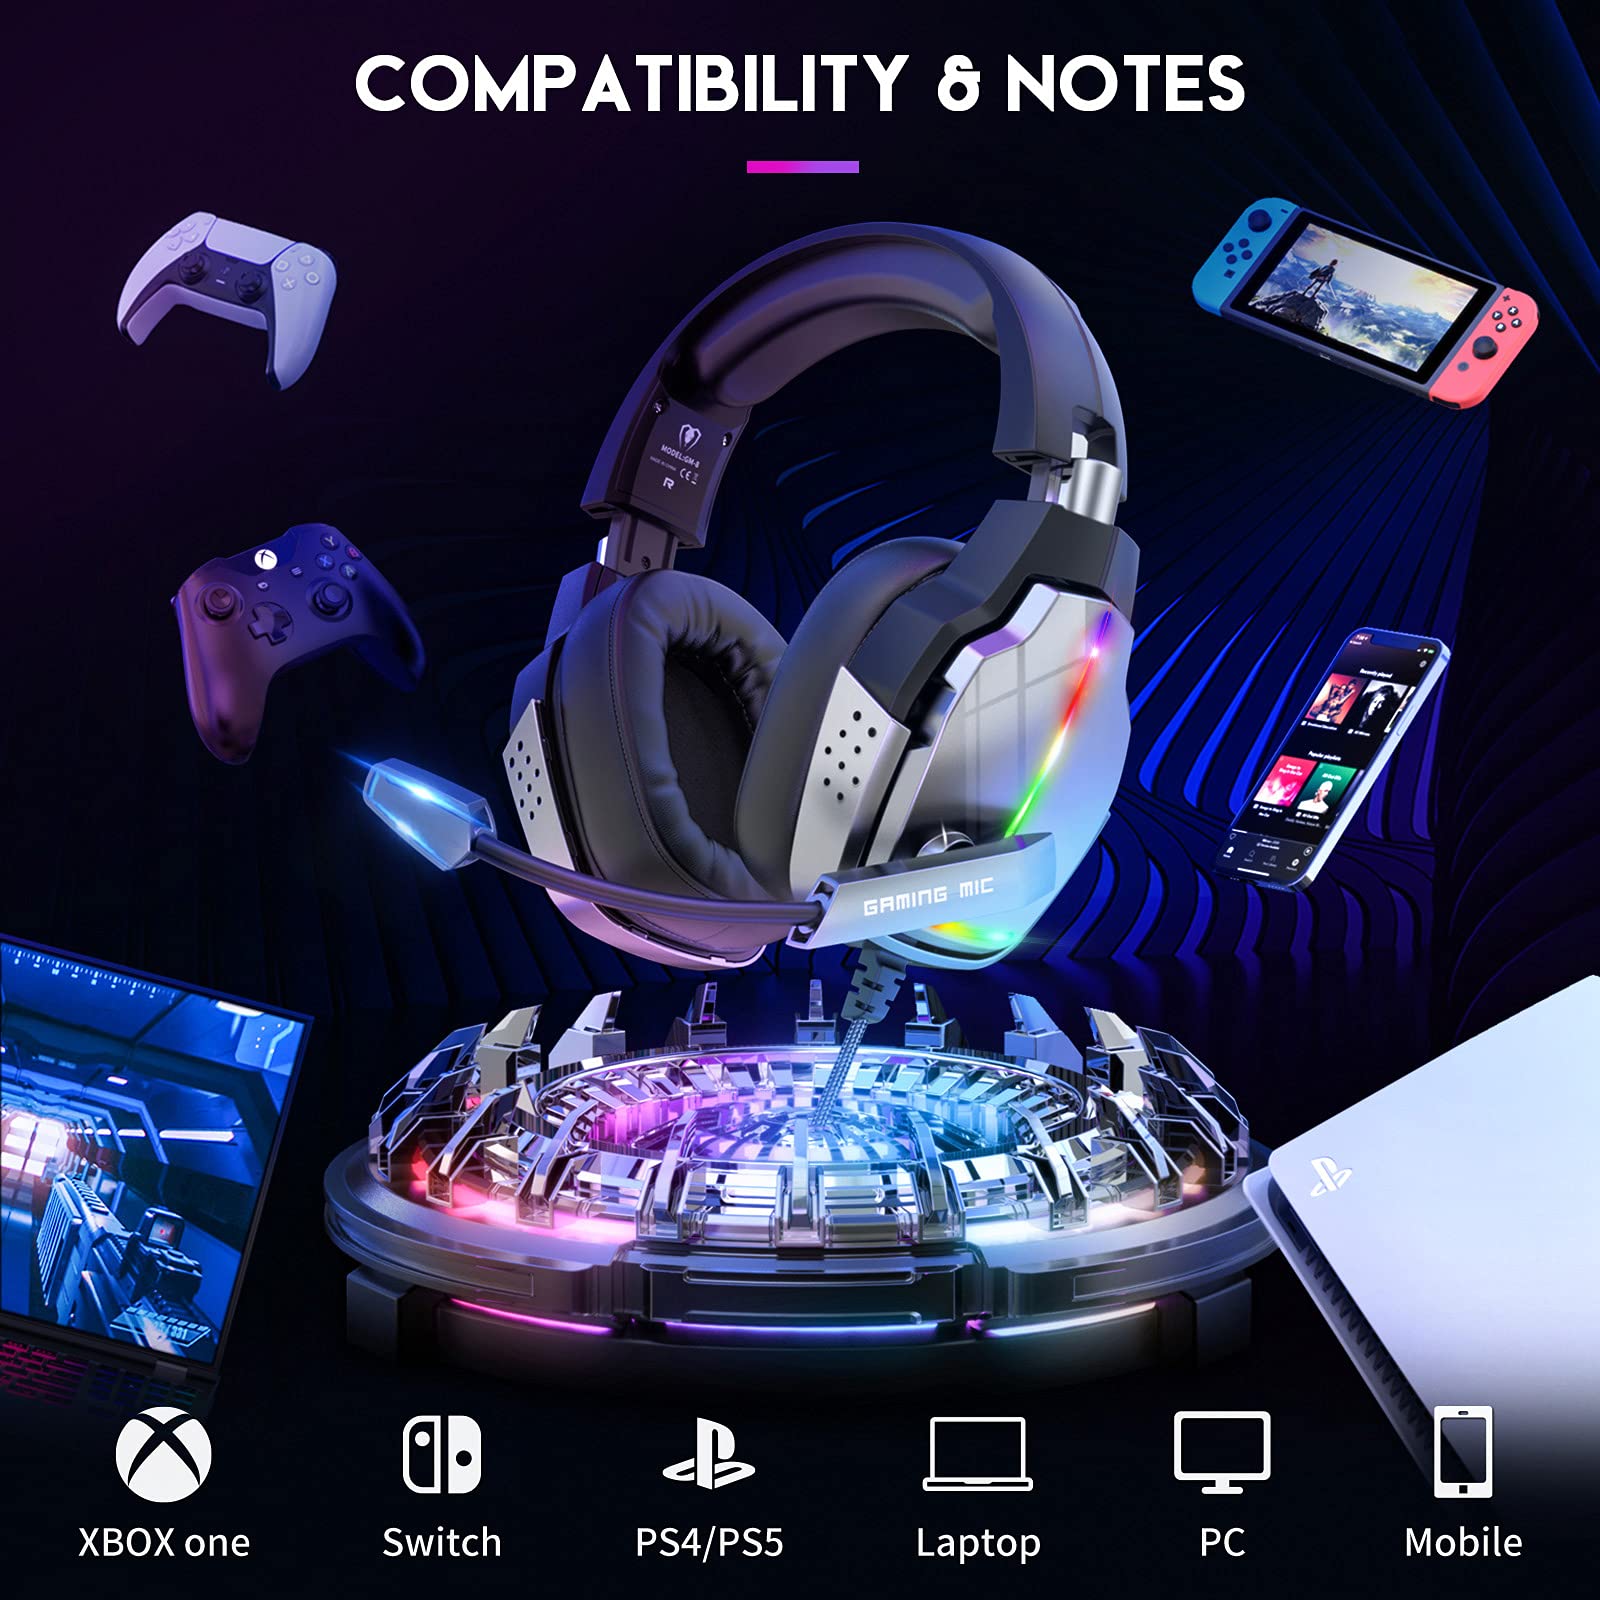 Gaming Headset for PS4 Xbox One Gaming Headphones with Mic Surround Sound 4 RGB LED Light Modes 90 Degrees Rotating Soft Earmuffs for PC PS5 Mac Laptop Mobile Switch